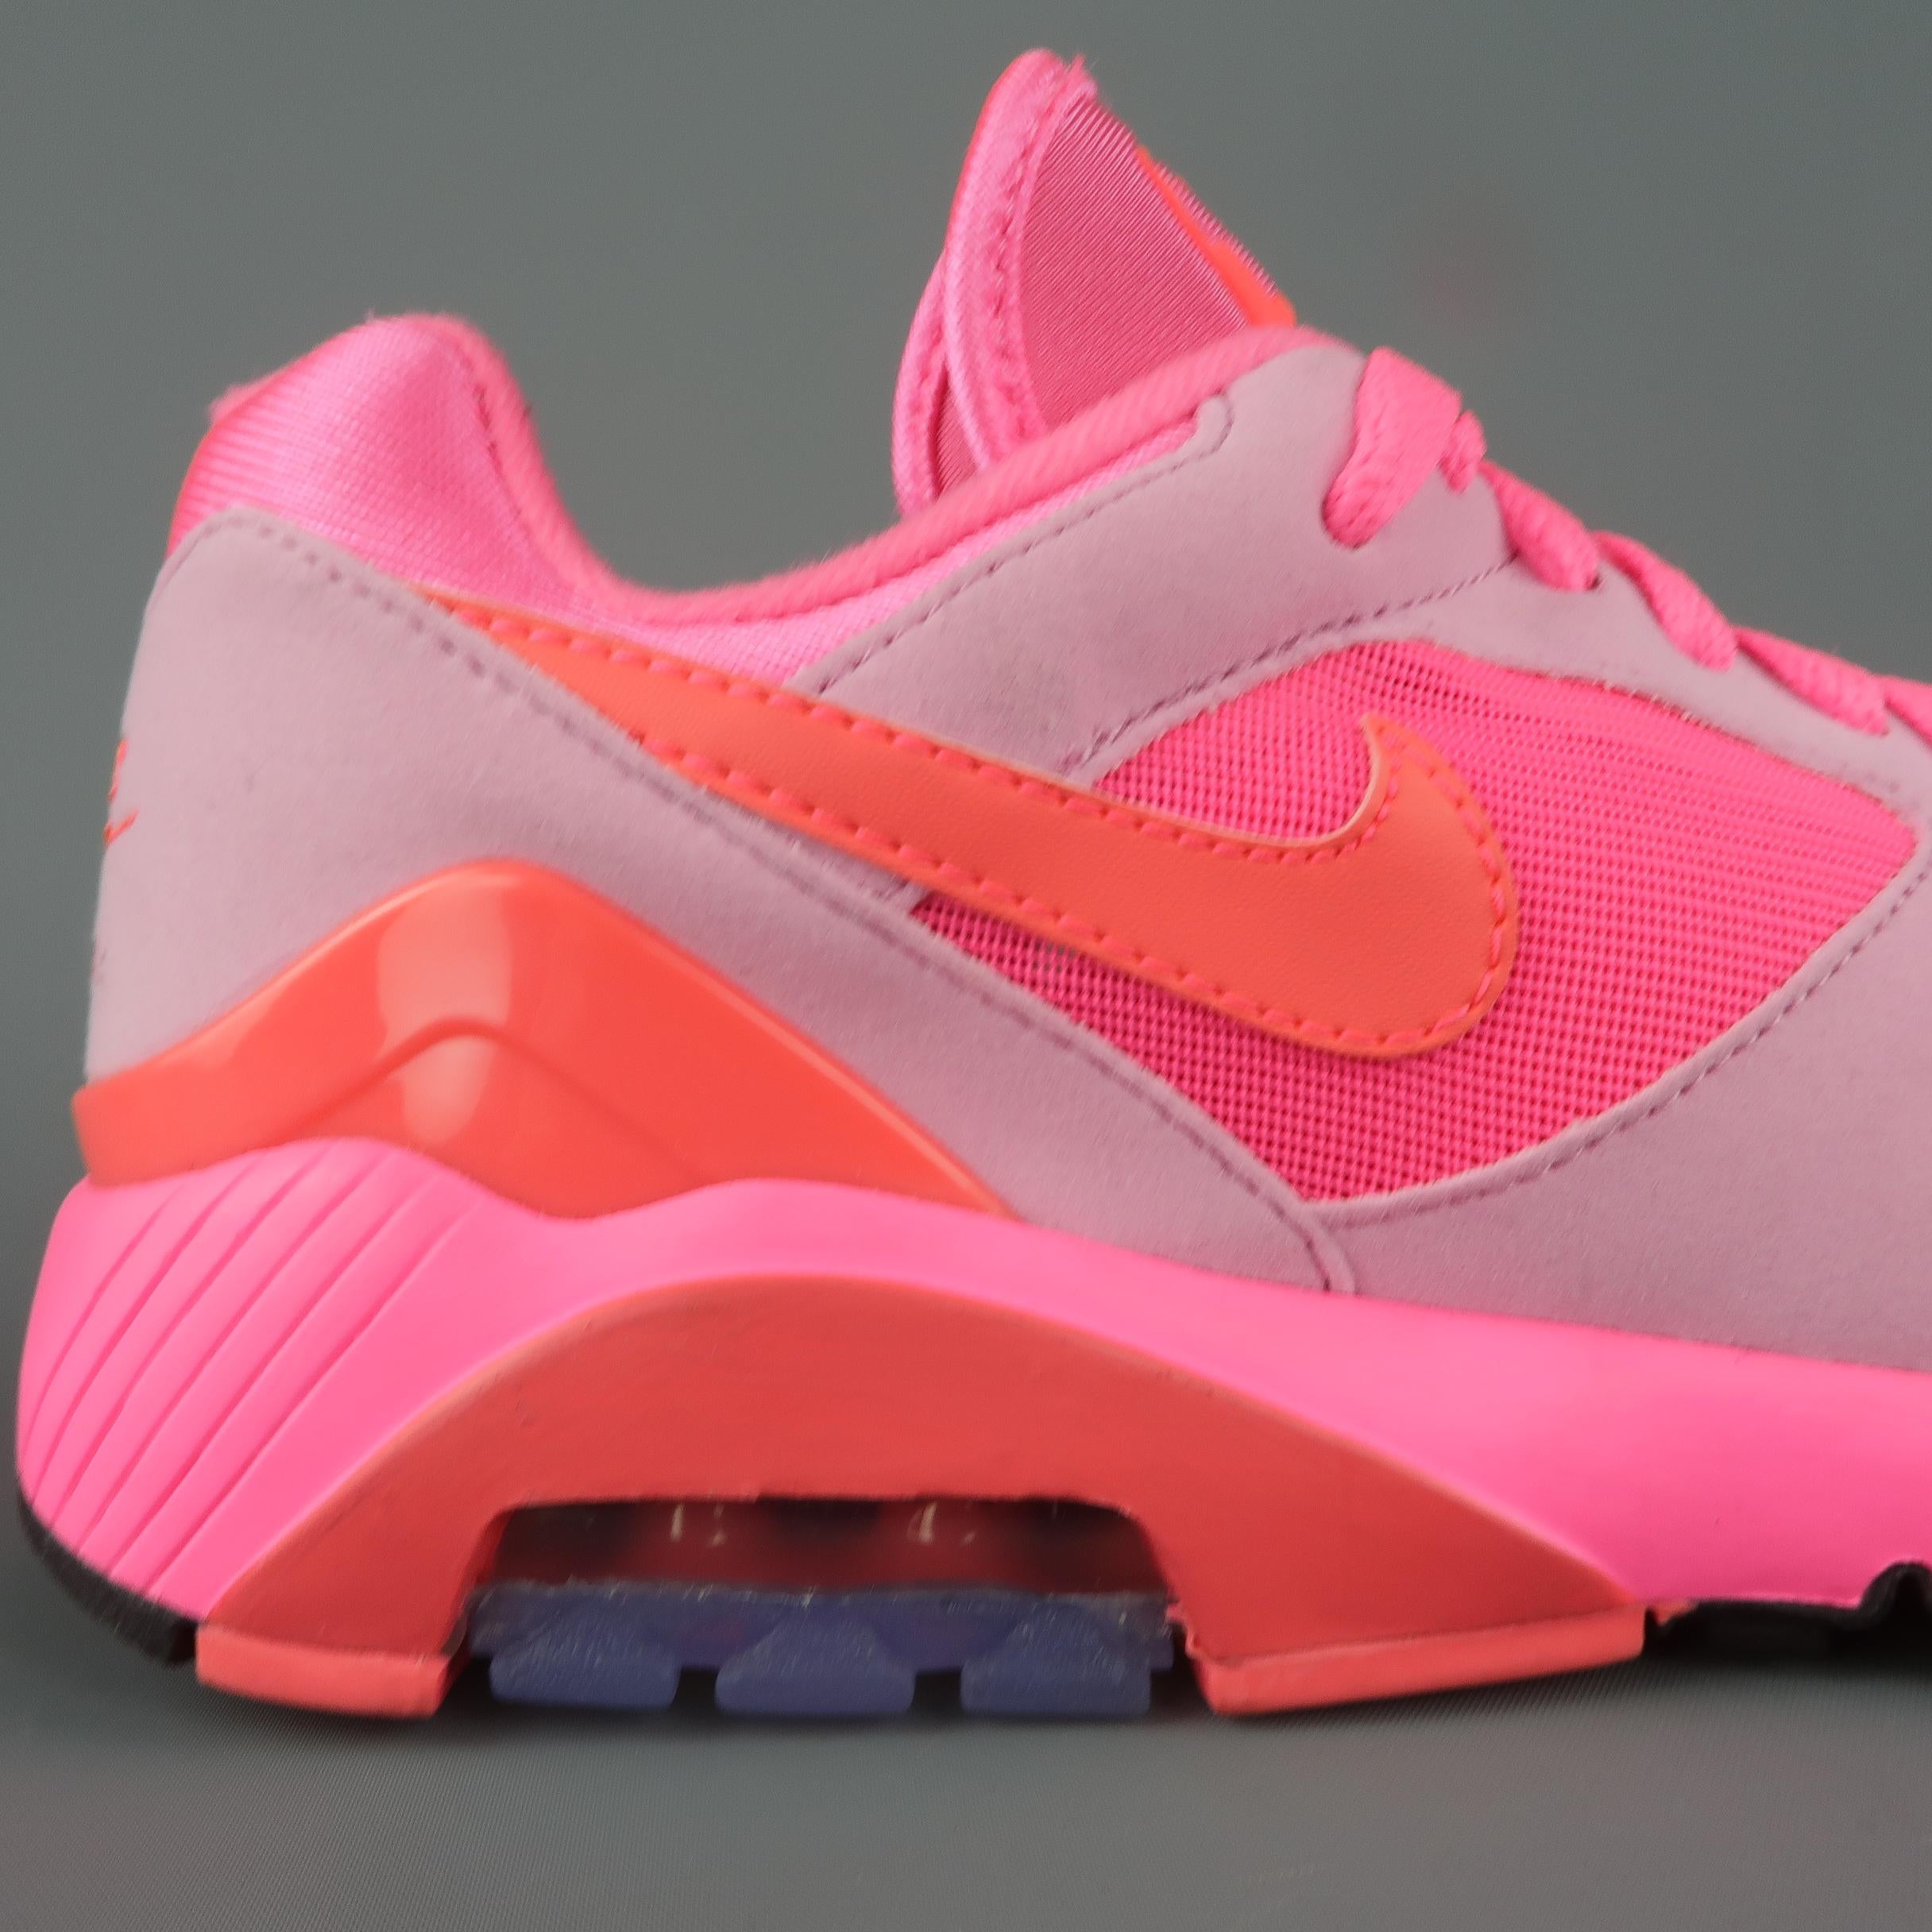 Men's COMME des GARCONS Nike Size 5.5 Neon Pink Nylon Air Max 180 Sneakers Trainers